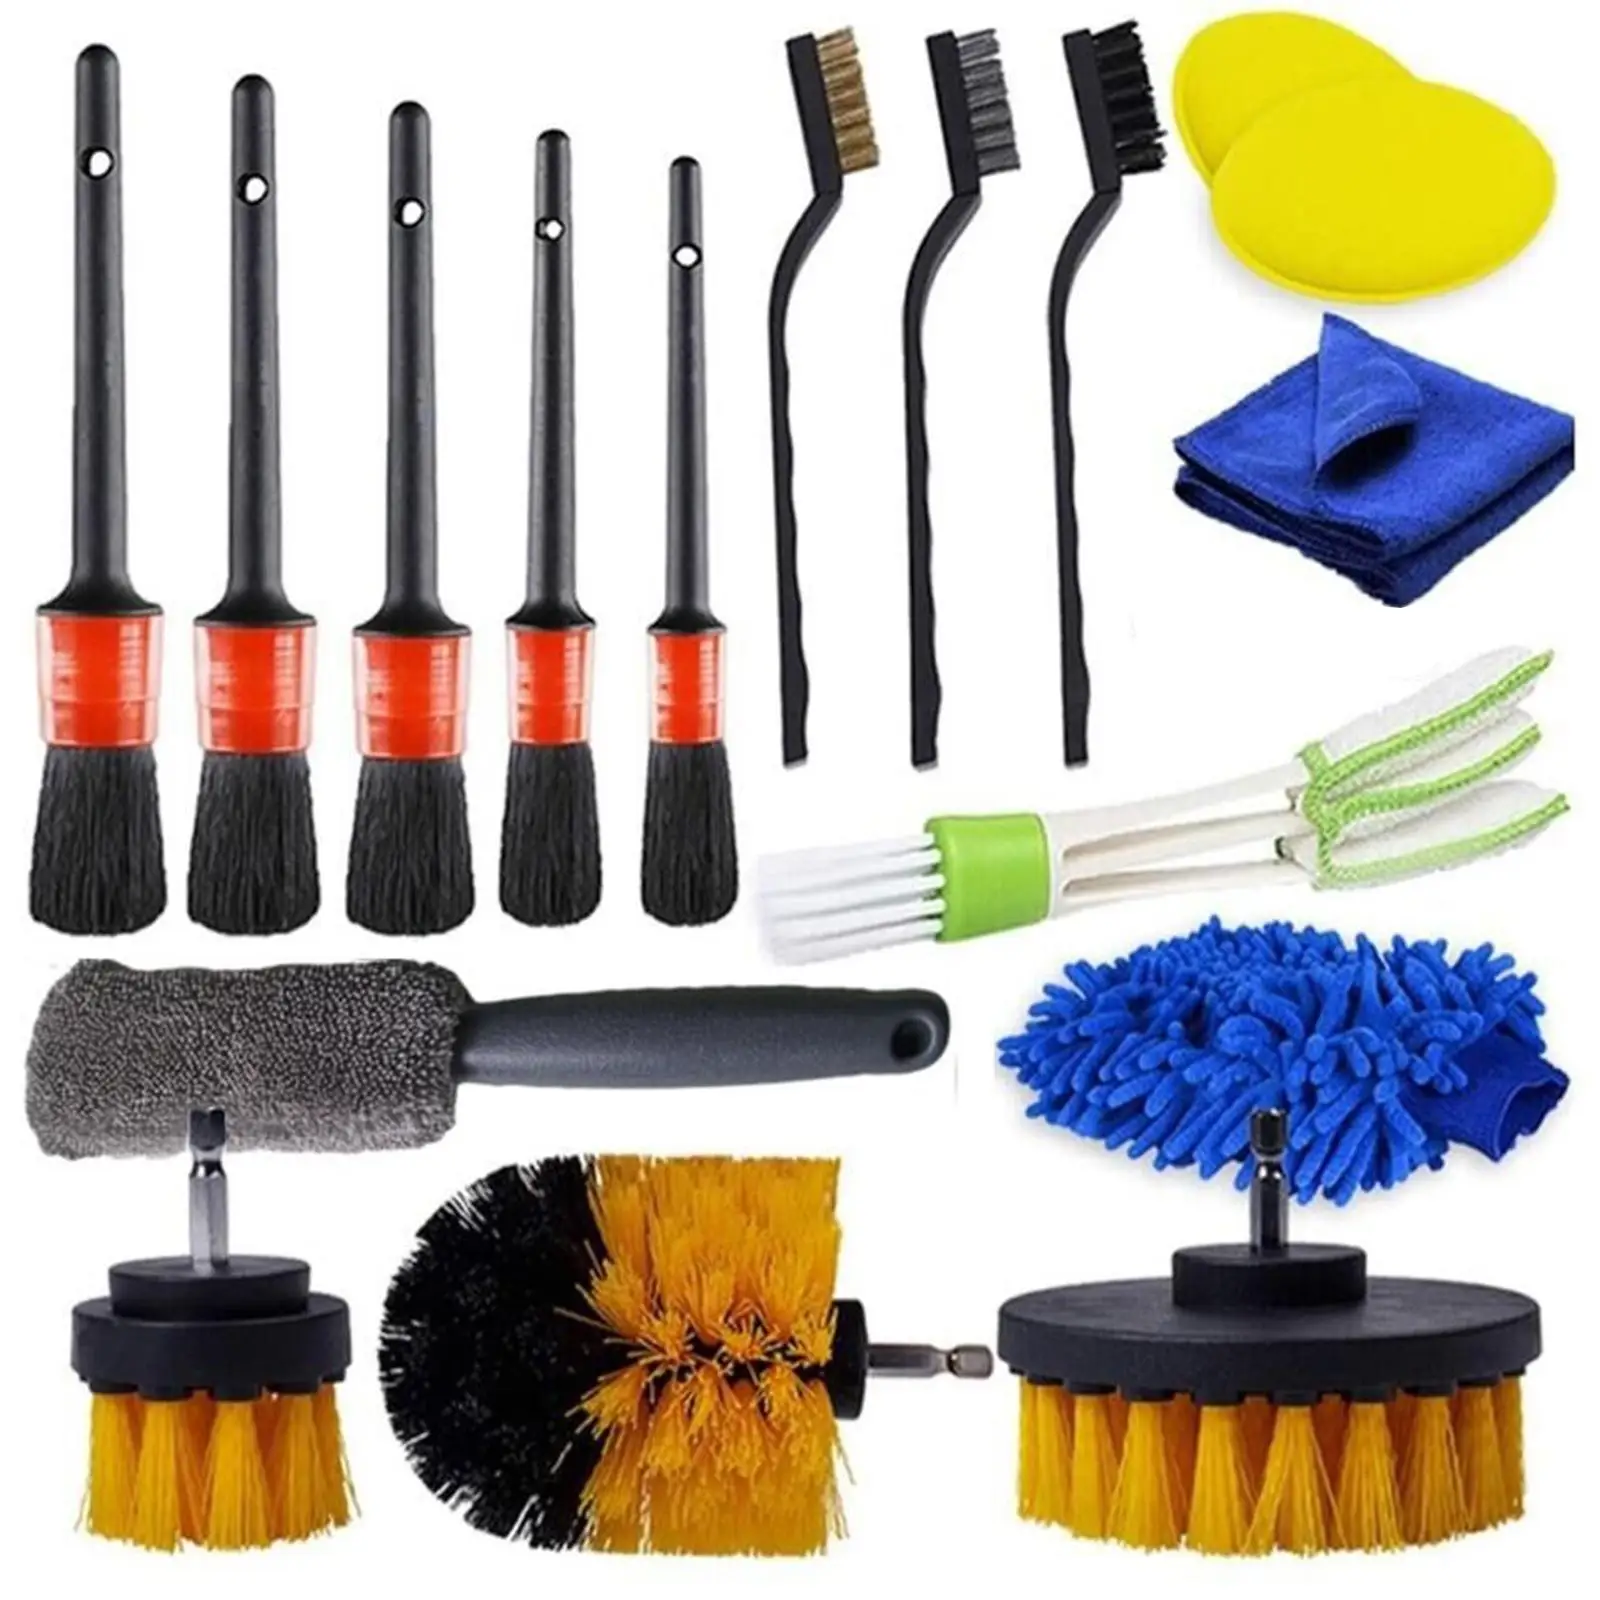 

Auto Detail Brush Set Power Scrubber Drill Brushes Car Detailing Brush For Air Vents Car Polish Pad For Glass Tire Rim Cleaning